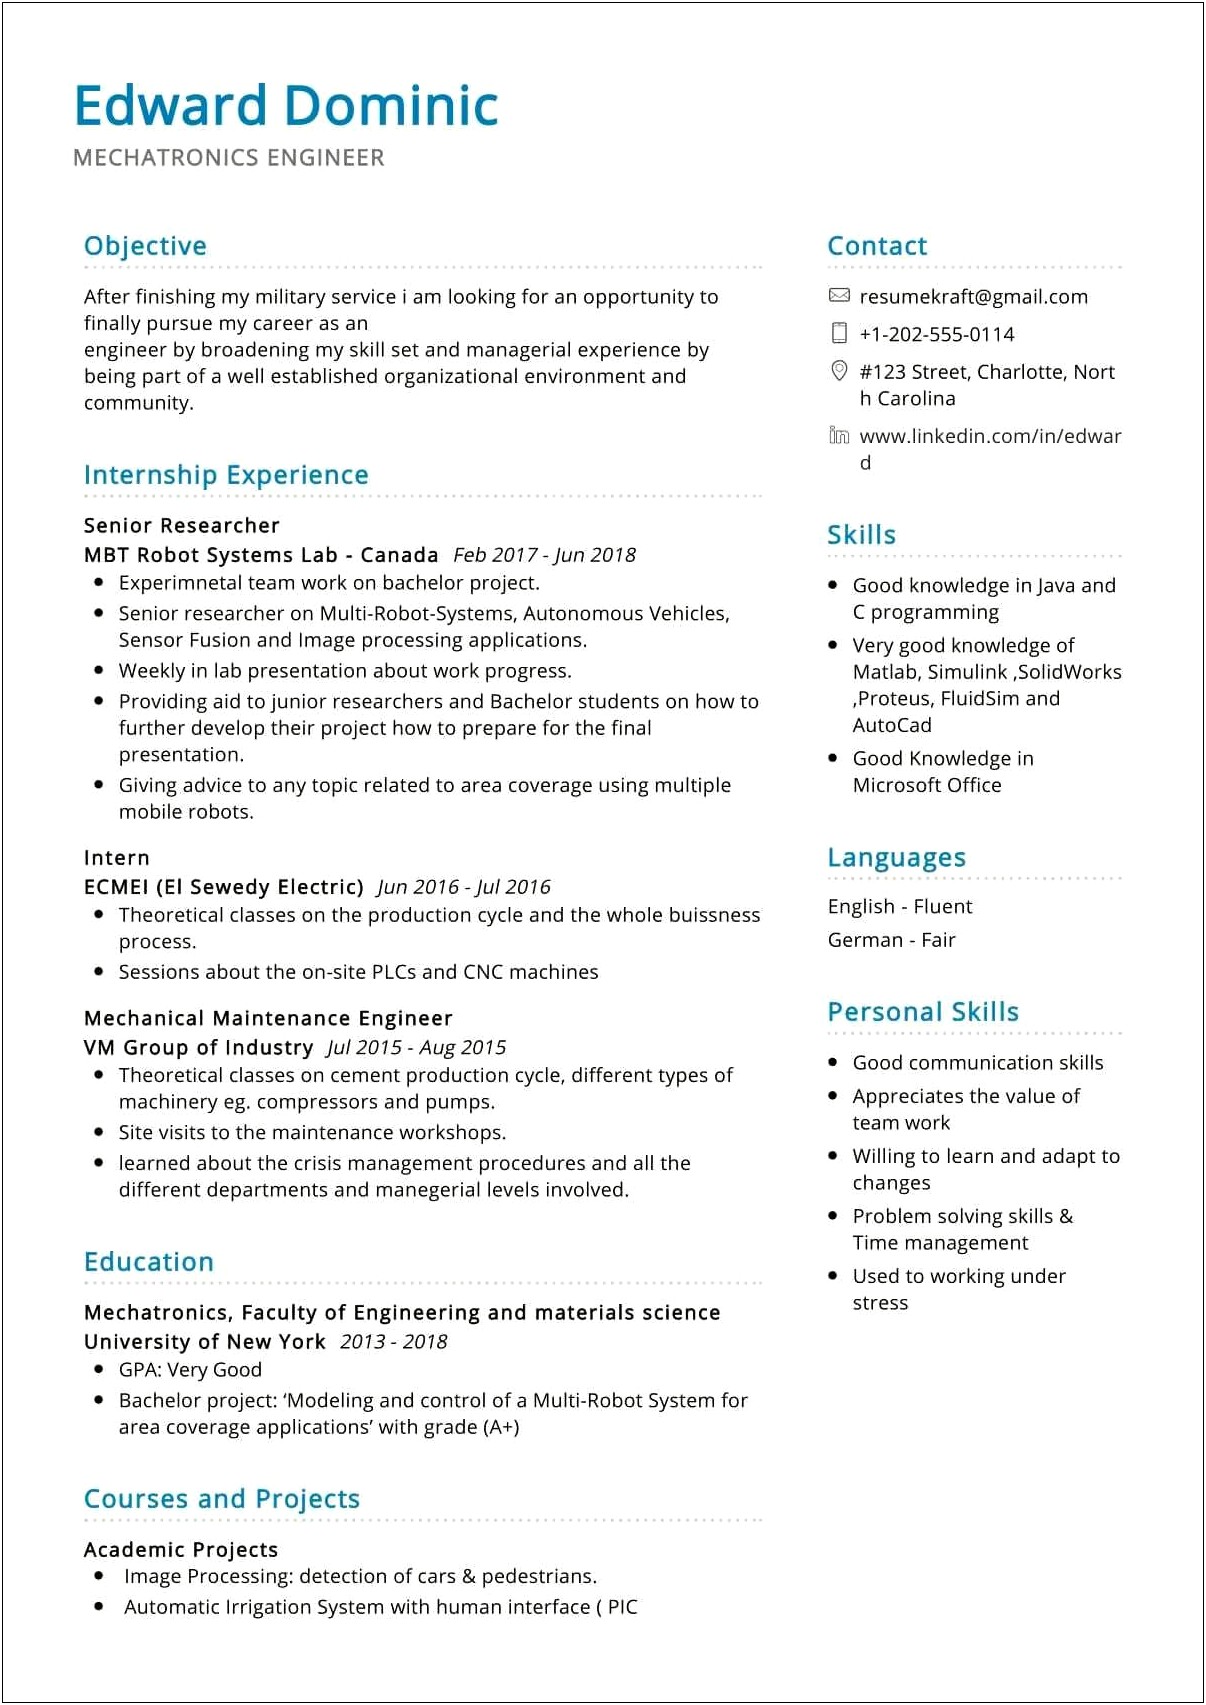 Working In Stressful Situations Skill On Resume